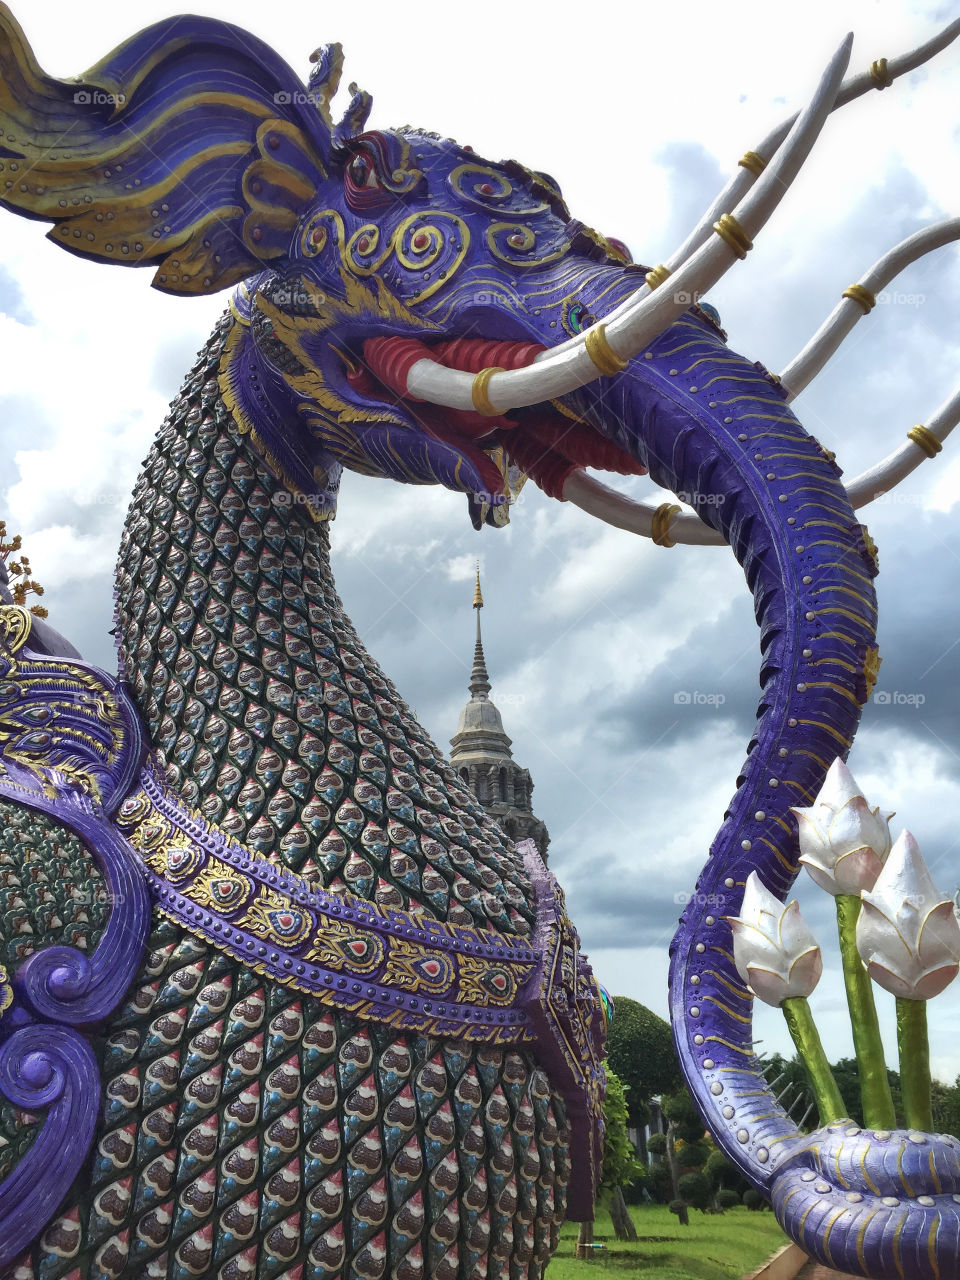 Mythical creature guarding a temple in Chiangmai Thailand 